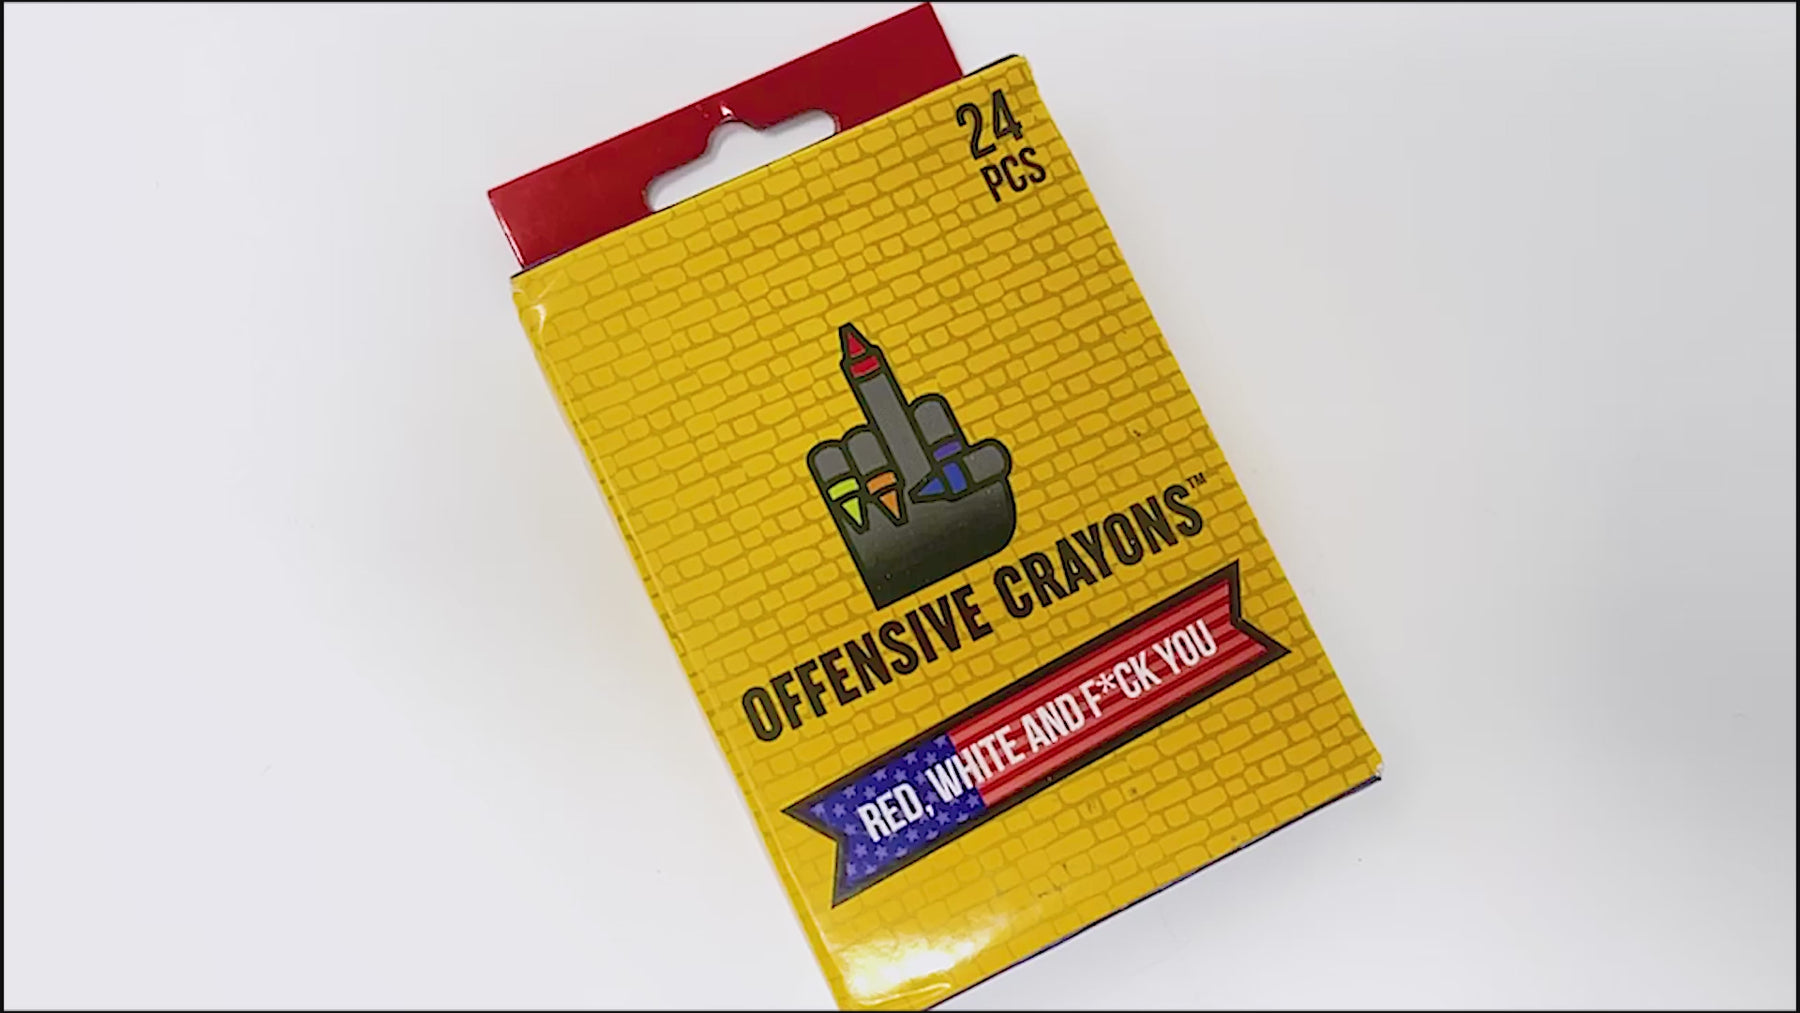 Offensive Crayons: Red, White, and Fuck You